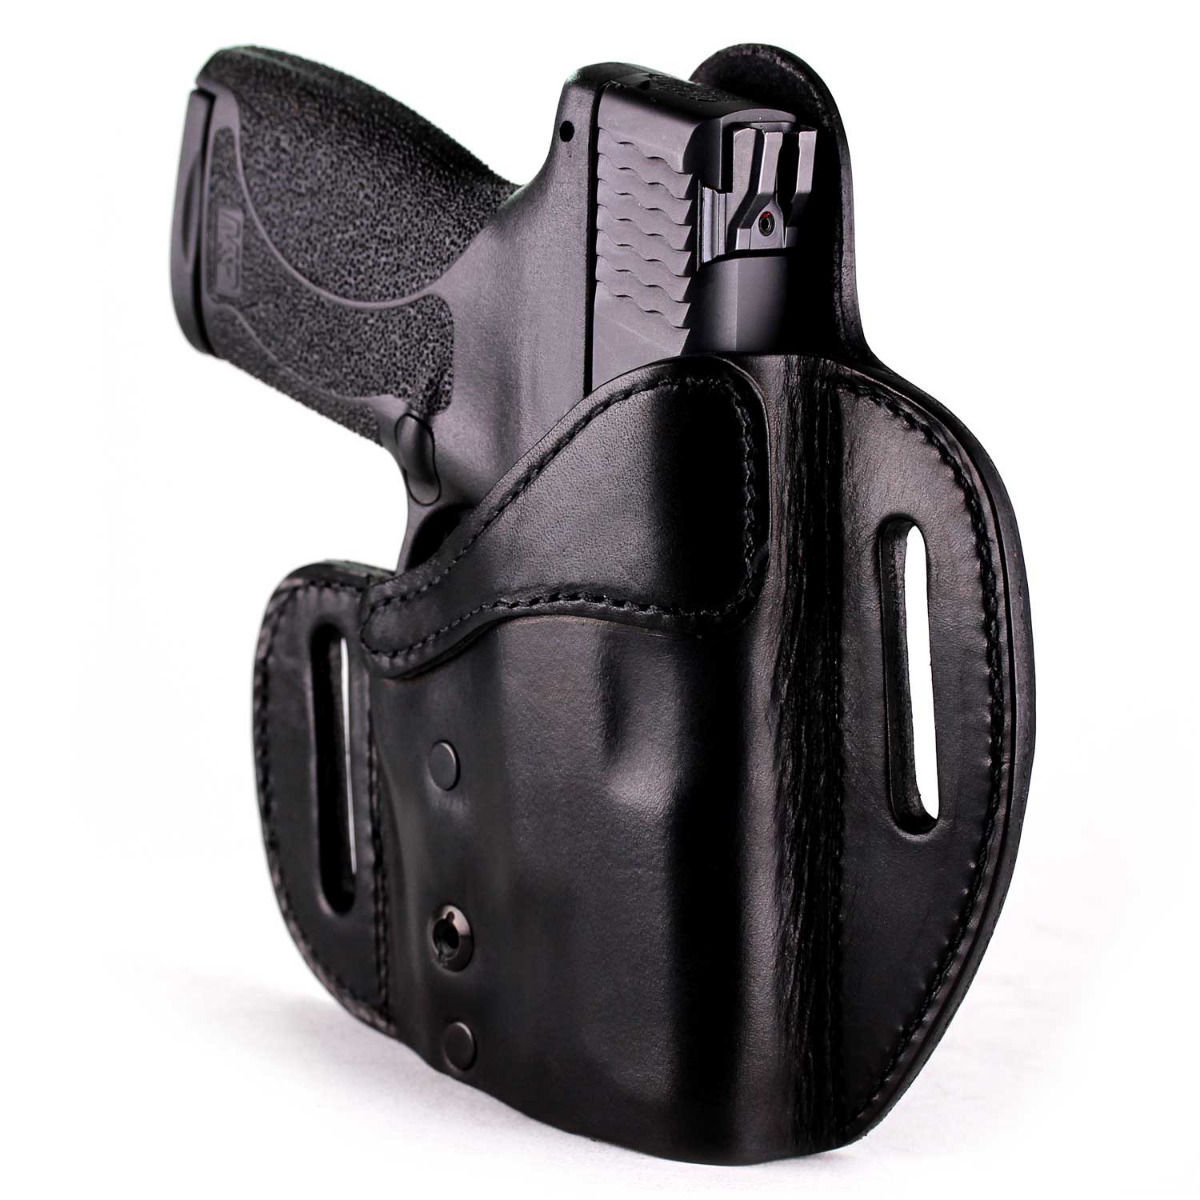 GUN HOLSTER FOR GLOCK 17 31 IWB LEATHER HOLSTER CONCEAL CARRY. 22